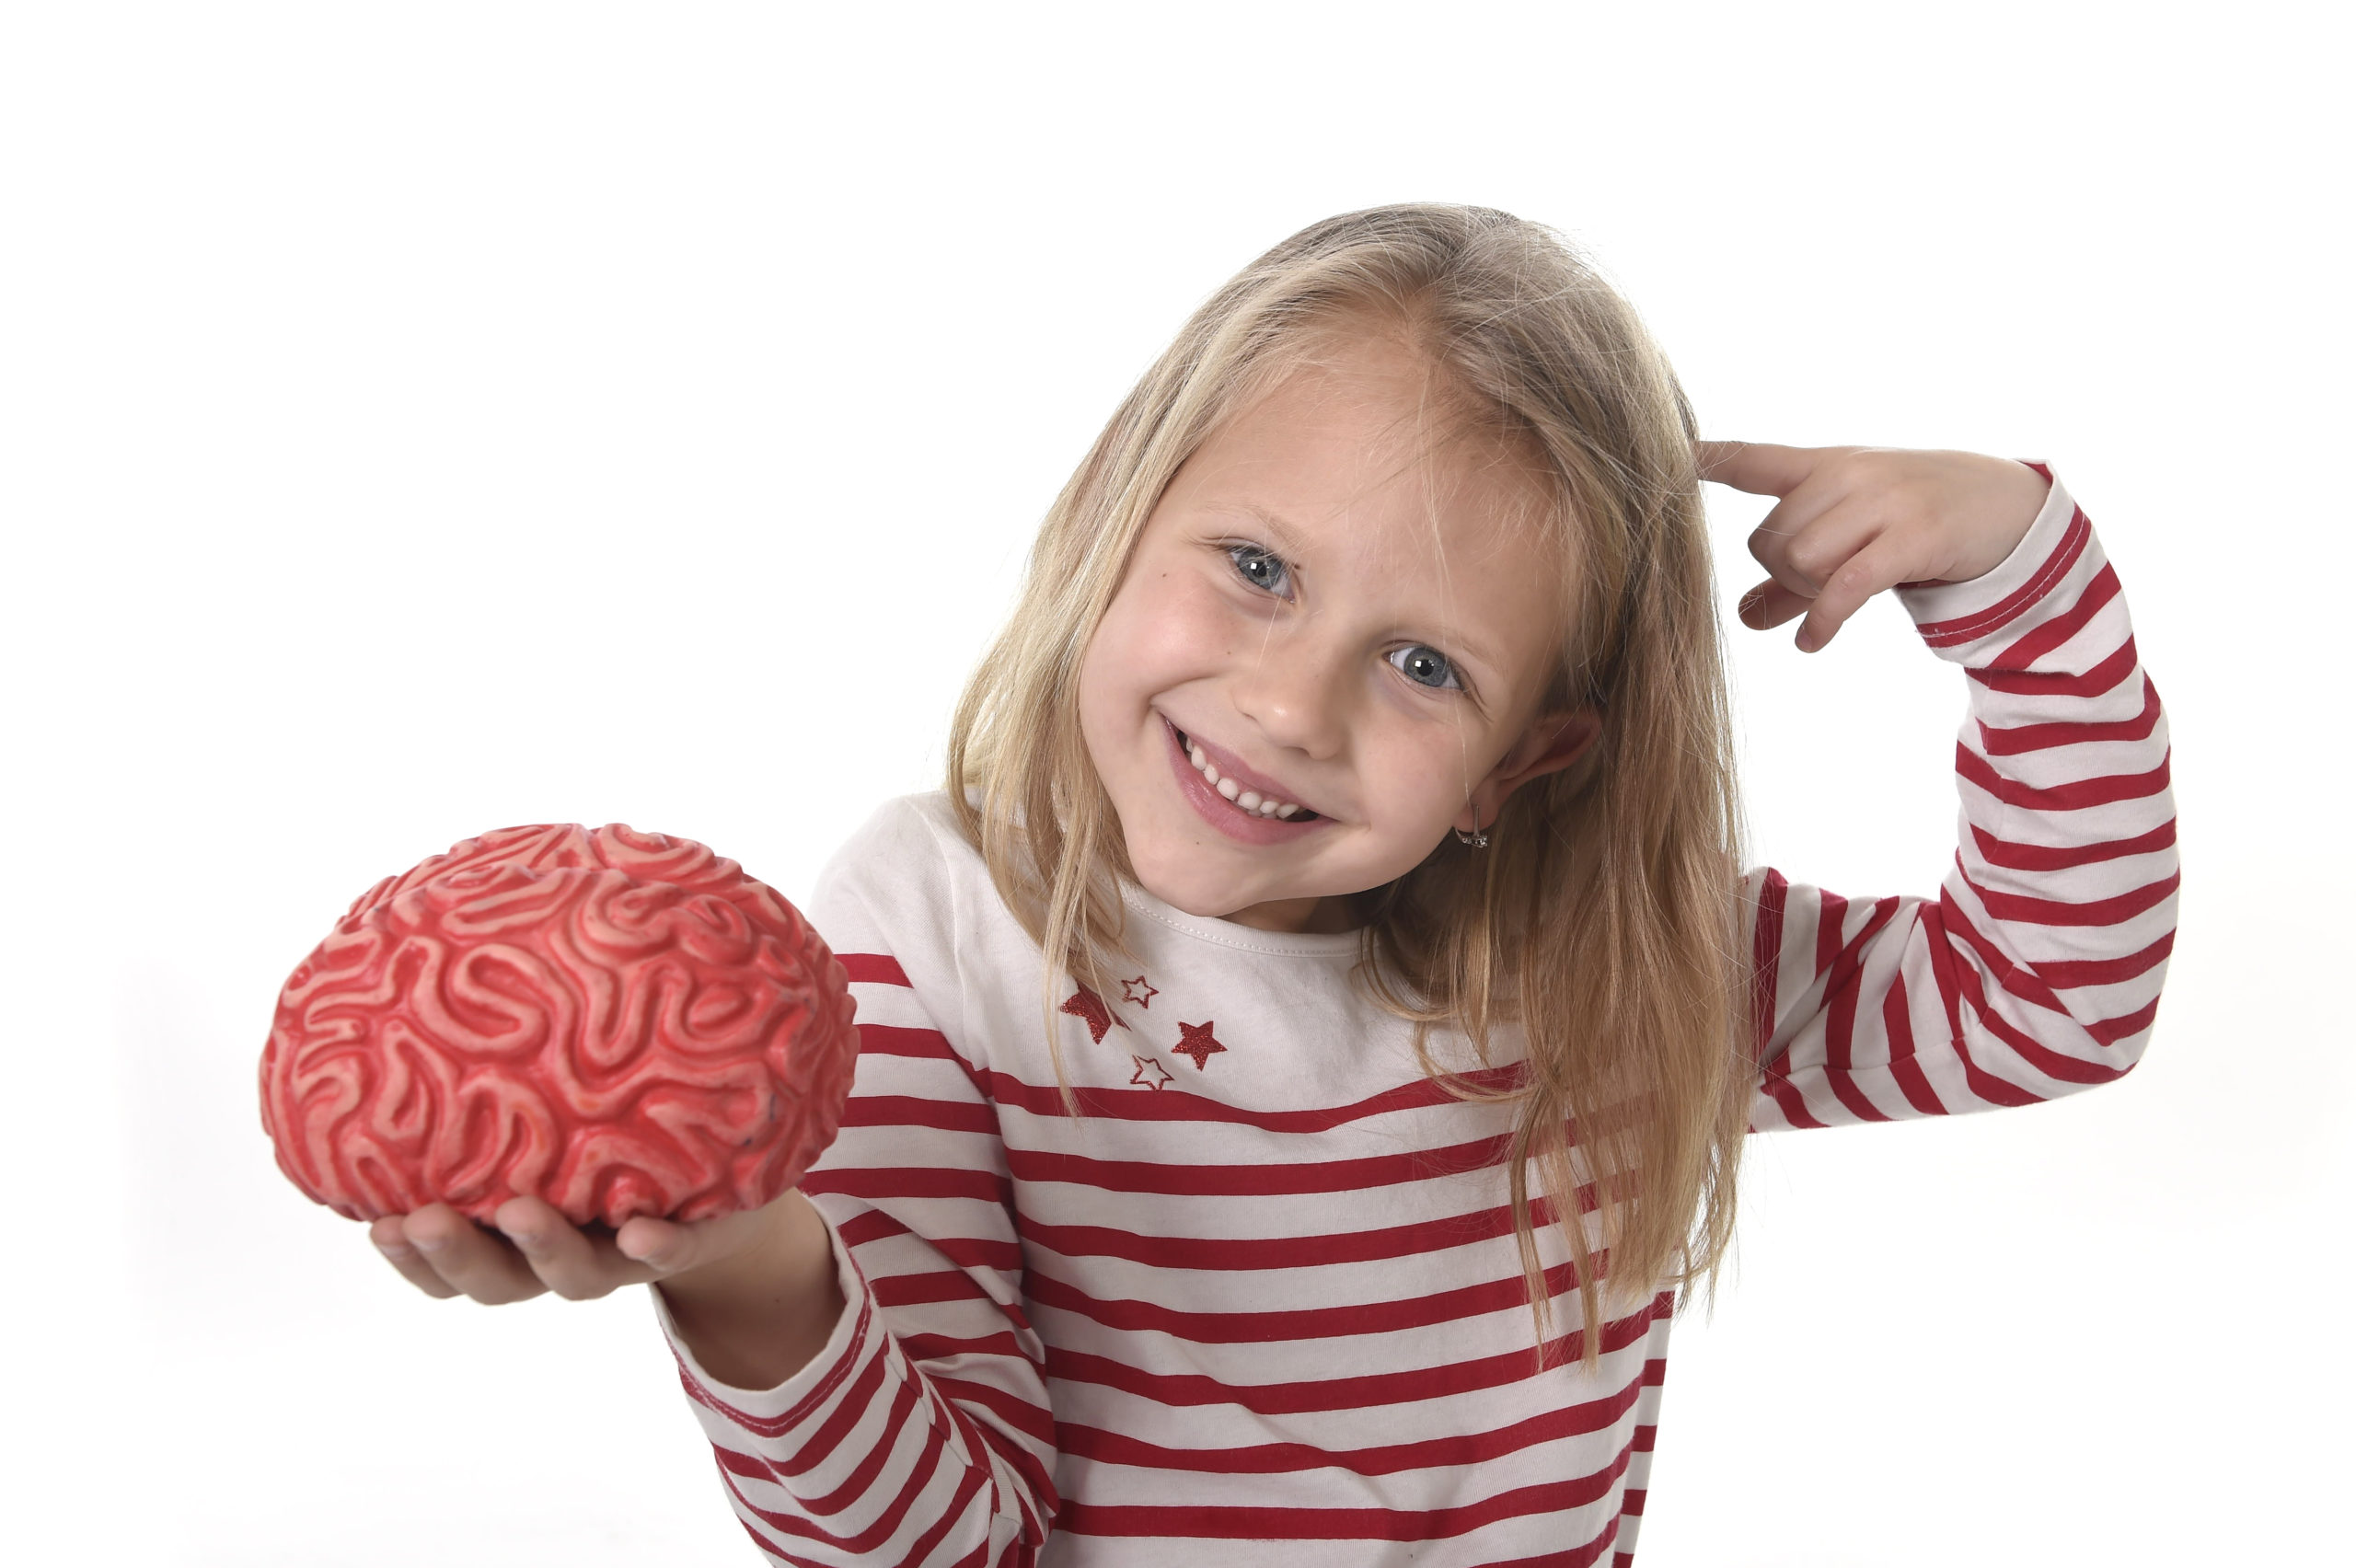 Saturday Science Club (Abingdon) - All in the Mind (ages 5-9)